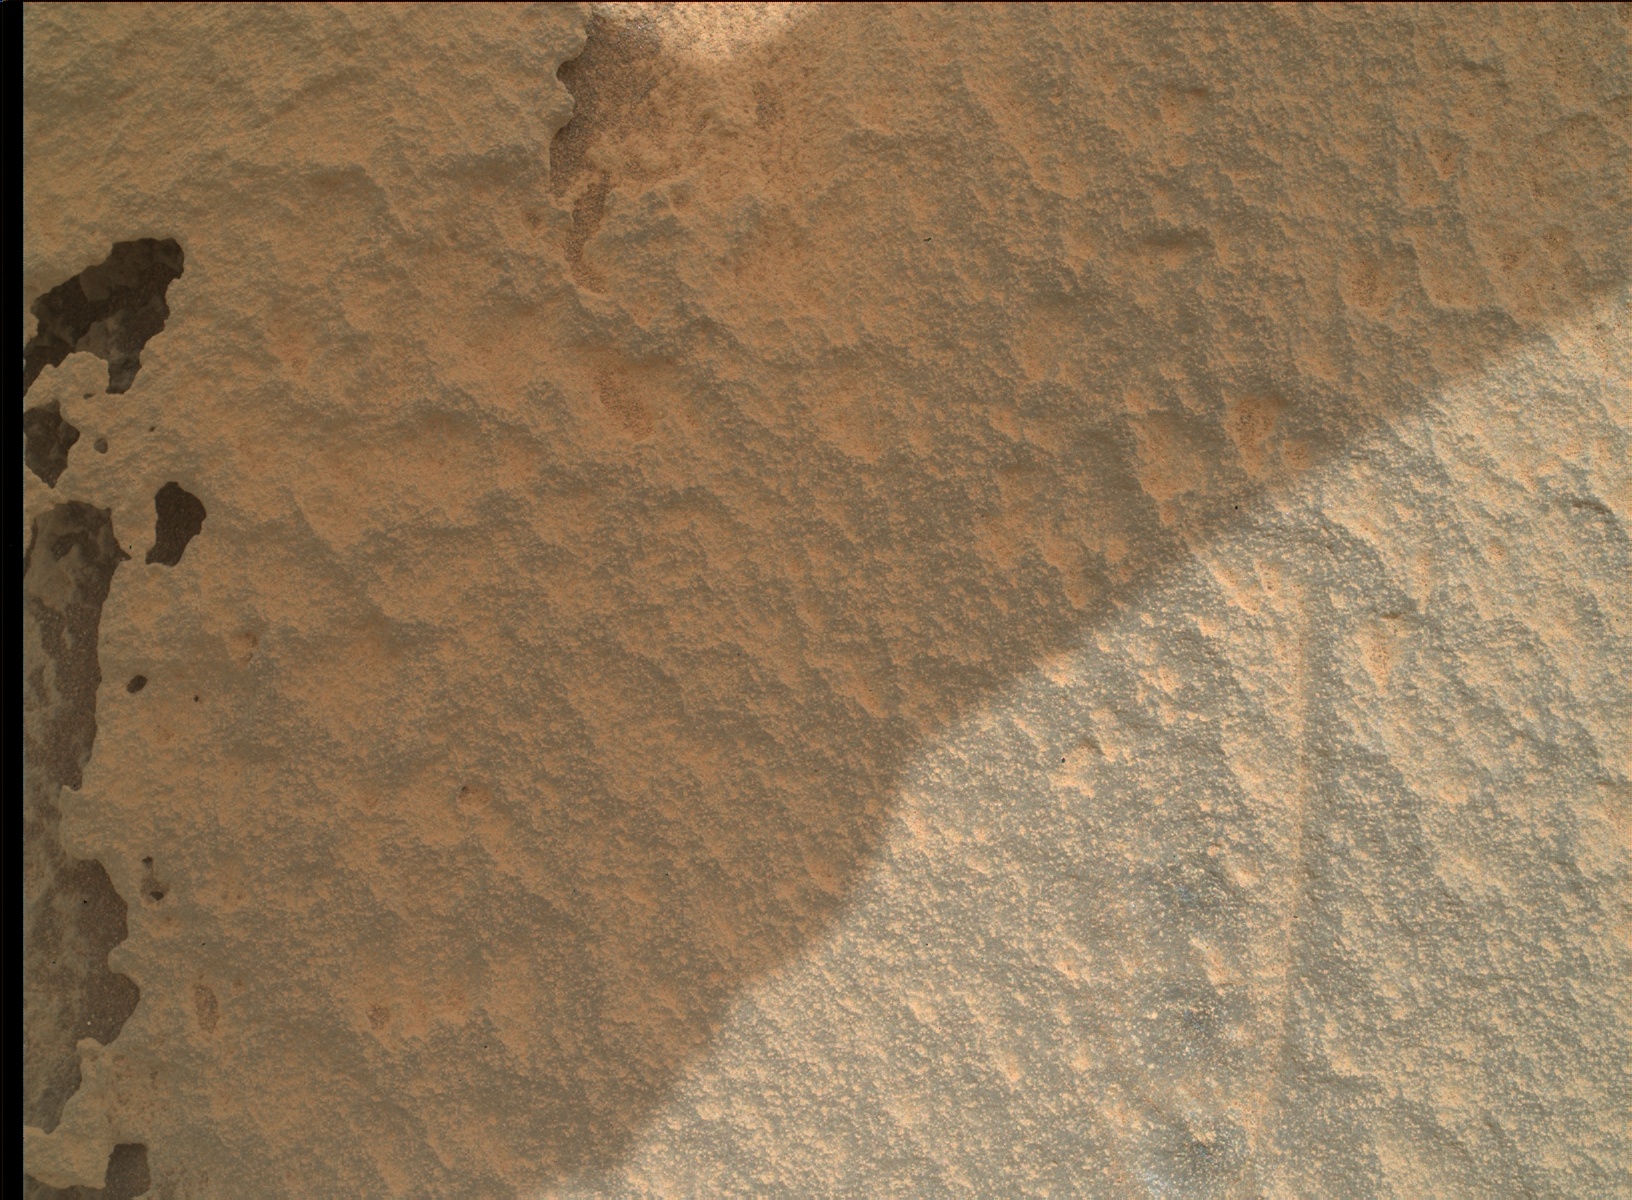 Nasa's Mars rover Curiosity acquired this image using its Mars Hand Lens Imager (MAHLI) on Sol 974